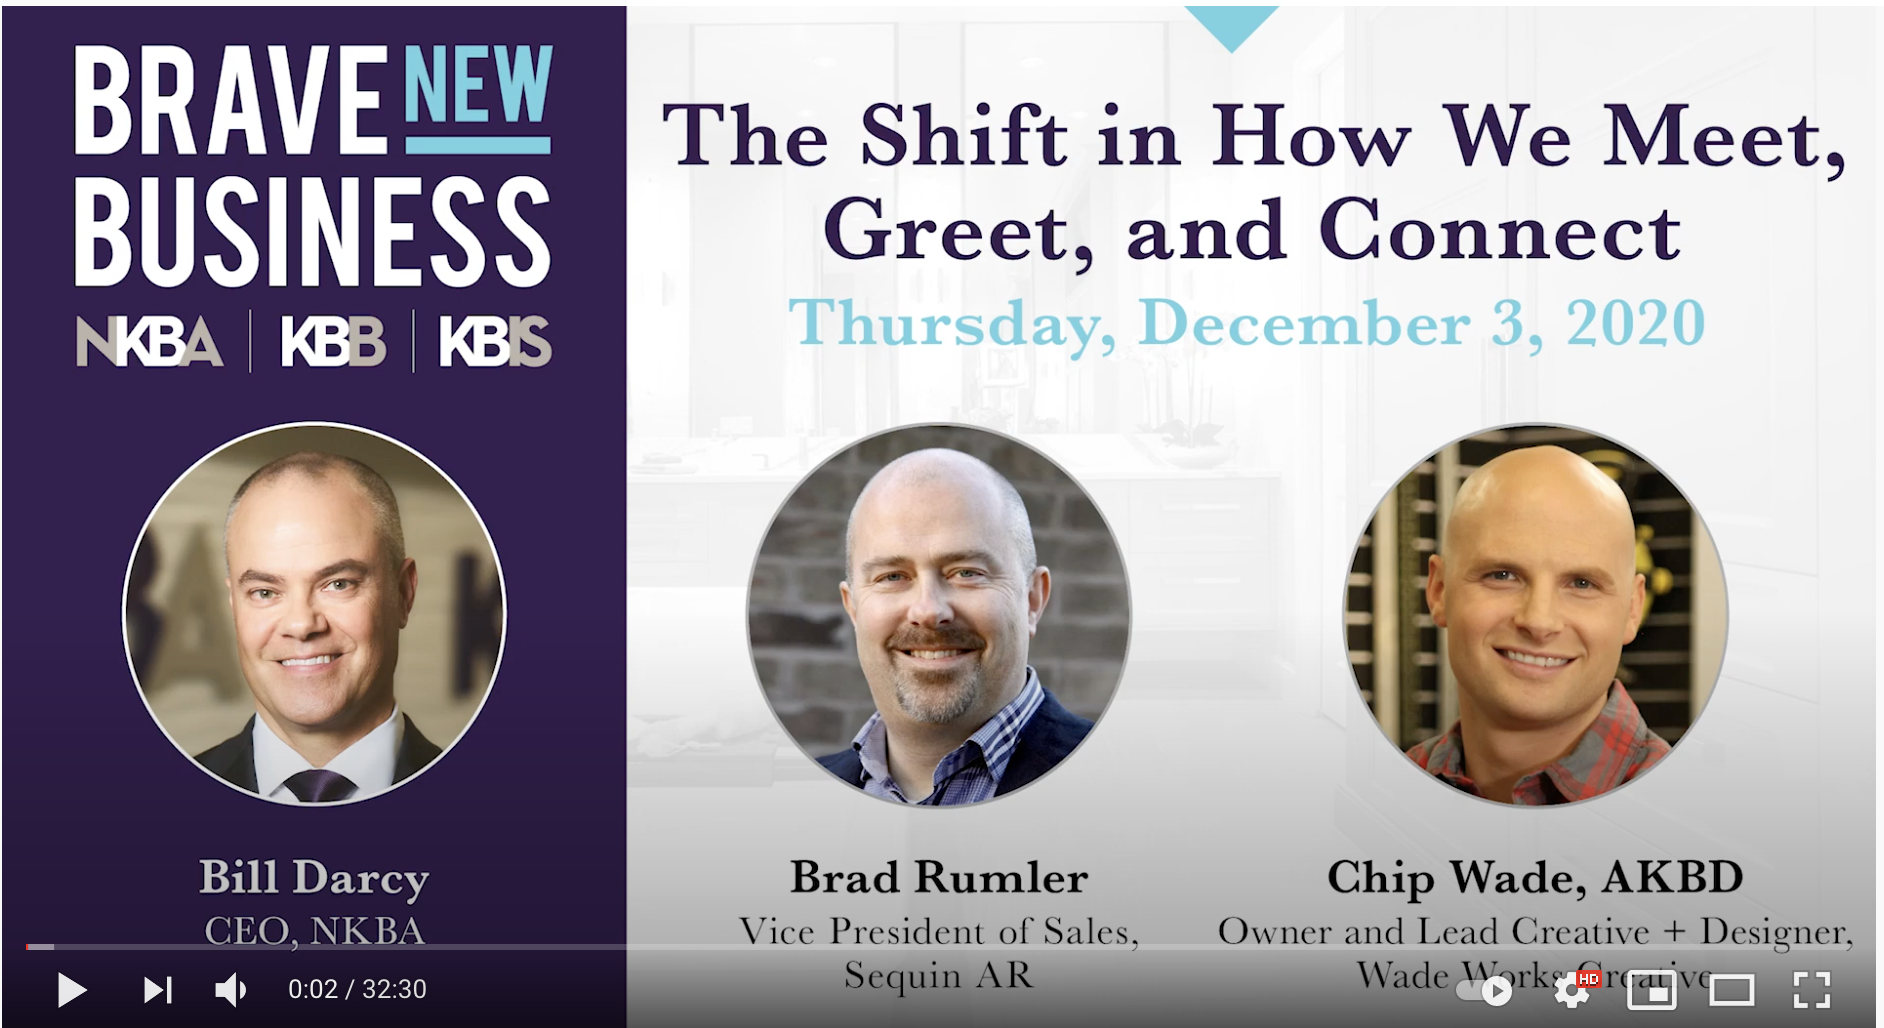 Brave New Business: The Shift in How We Meet, Greet, and Connect